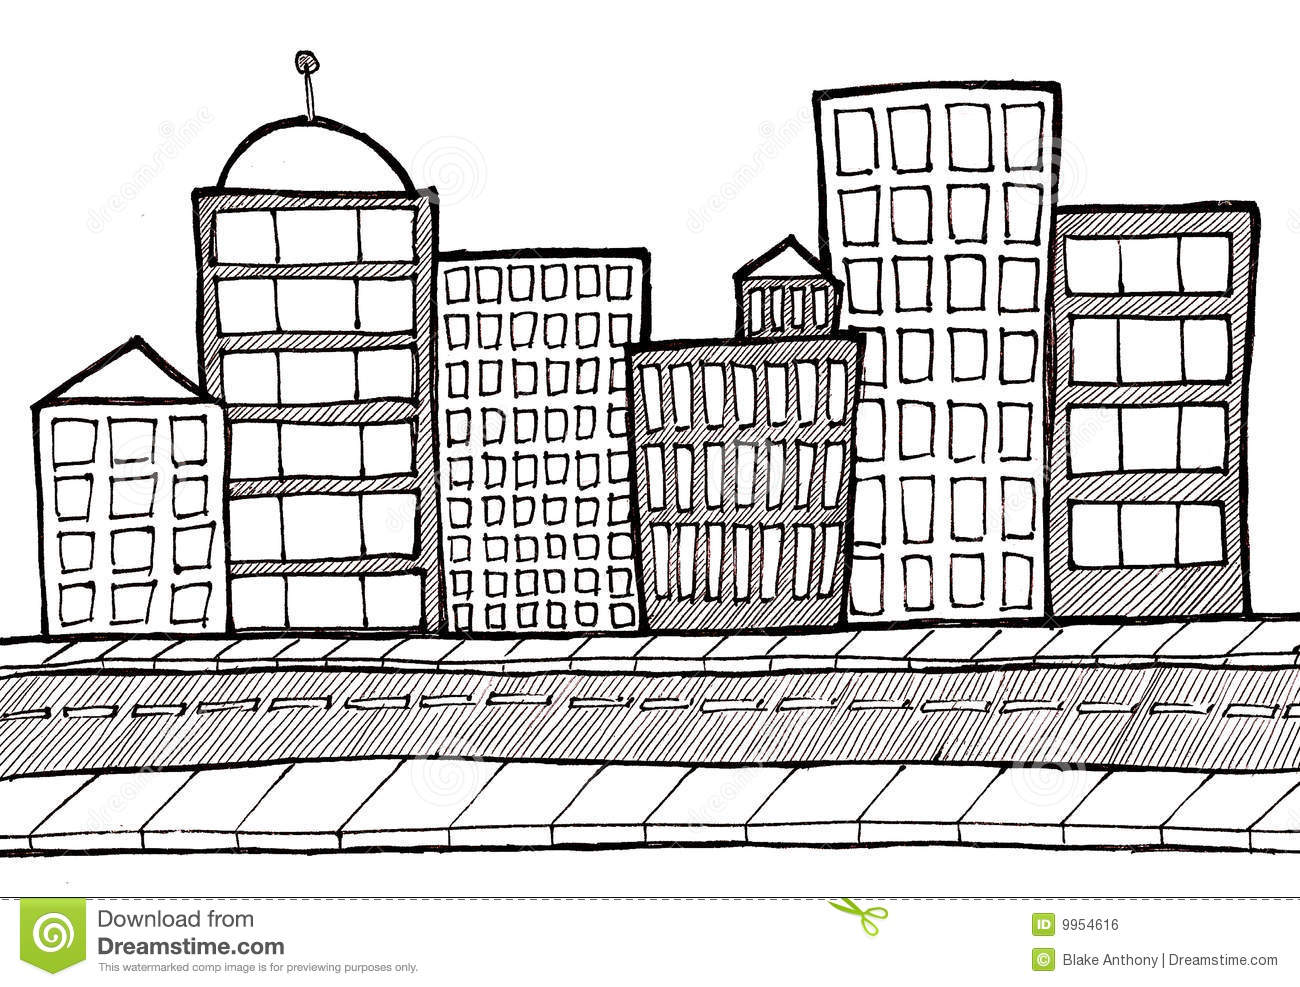 And White Illustration Of A Cityscape With A Sidewalk And Street